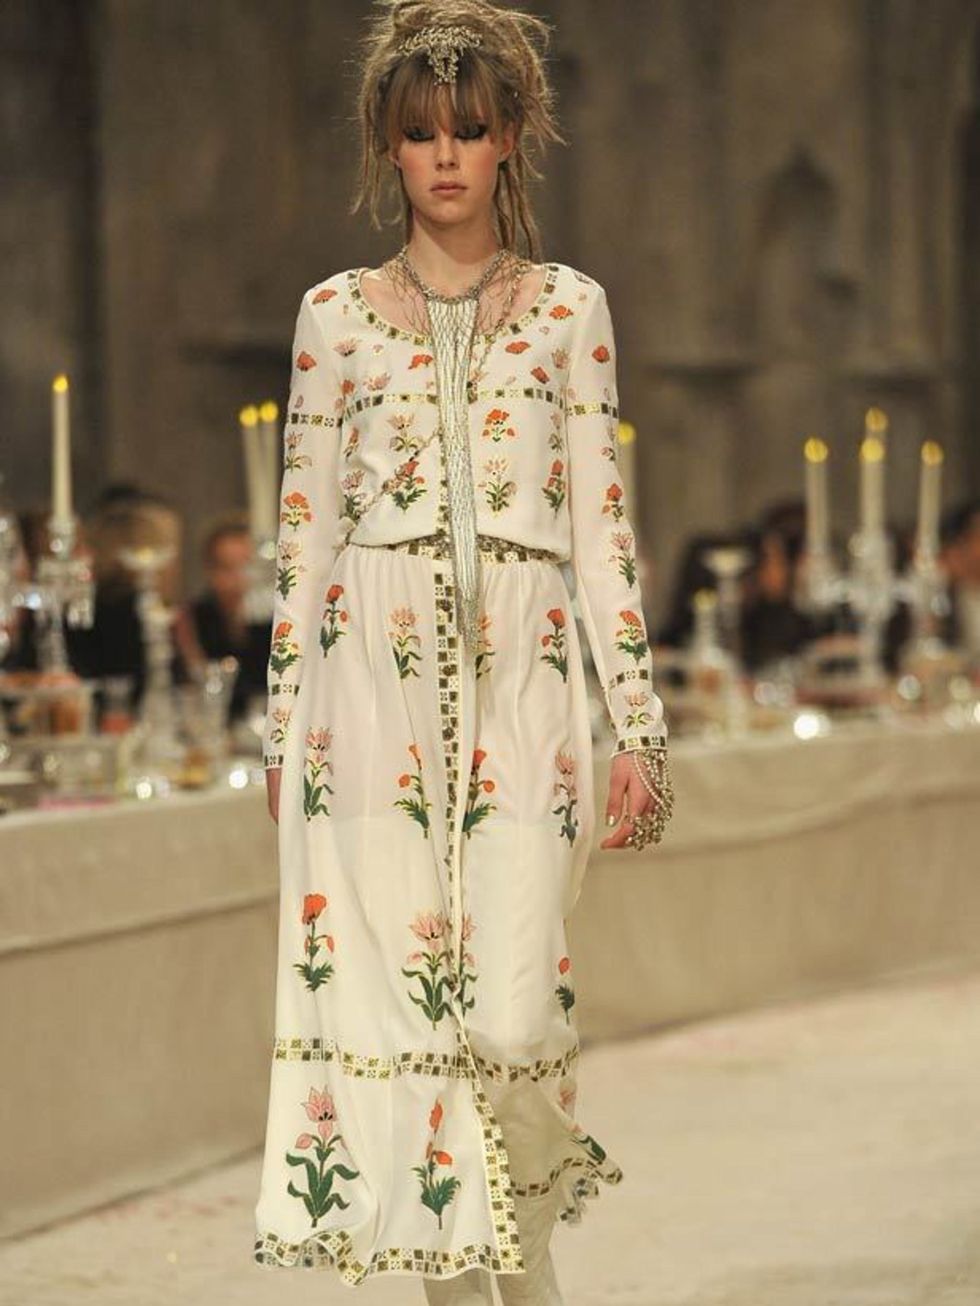 <p><a href="http://cms.elleuk.com/starstyle/celebrity-trends/(section)/ones-to-watch-2011">Edie Campbell</a> modelling a look in Chanel's pre-fall 2012 show.</p>